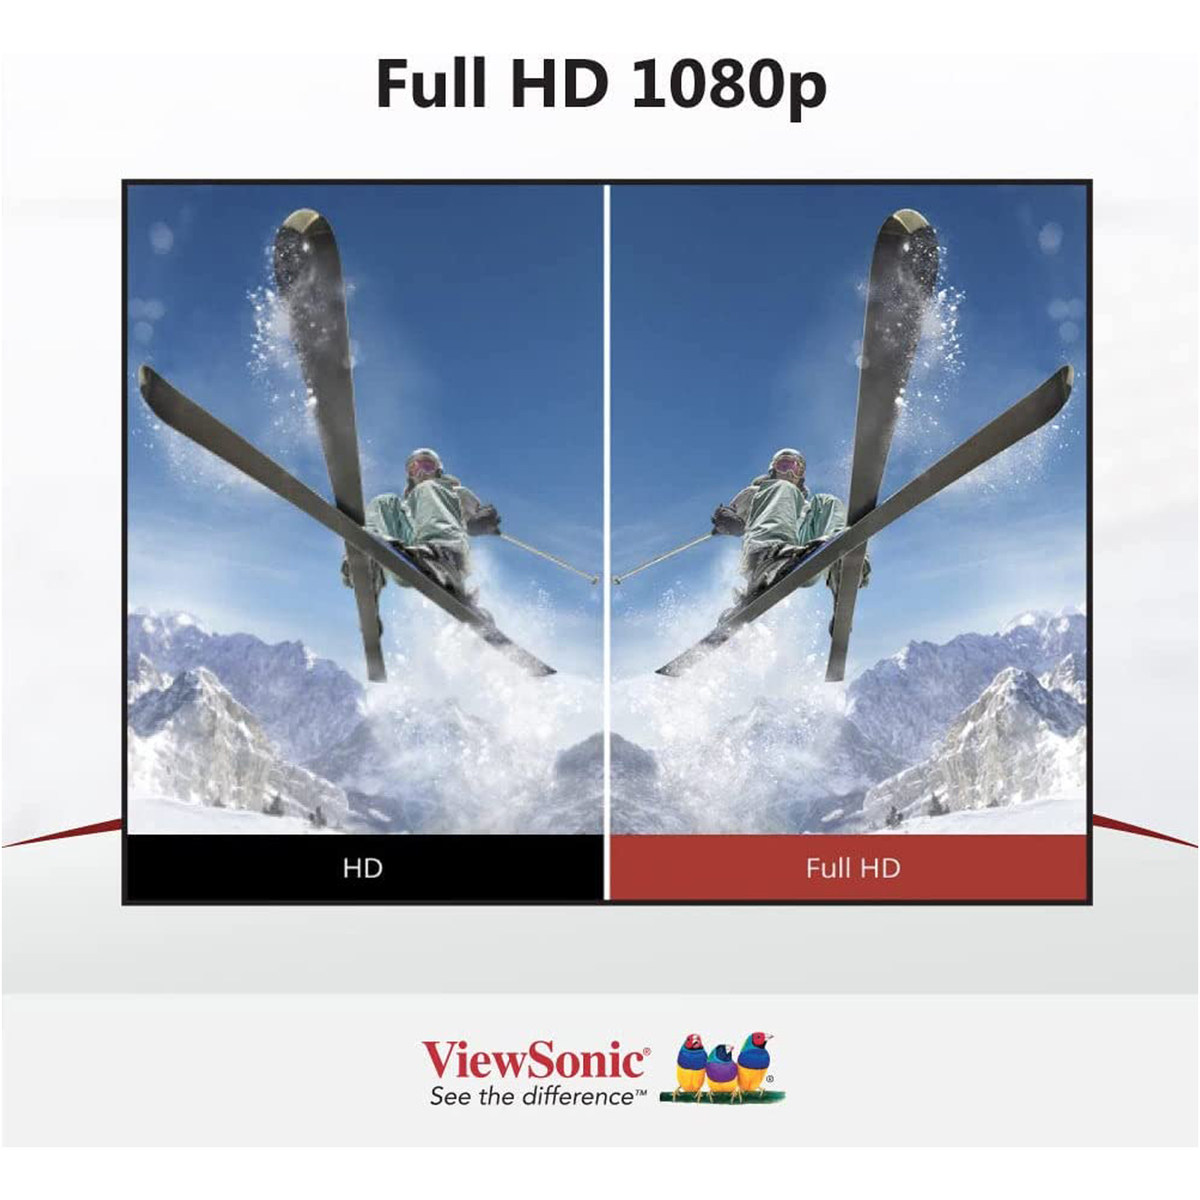 Viewsonic Va2405-H 24-Inch Full Hd Monitor With Vga, Hdmi, Eye Care For Work And Study At Home